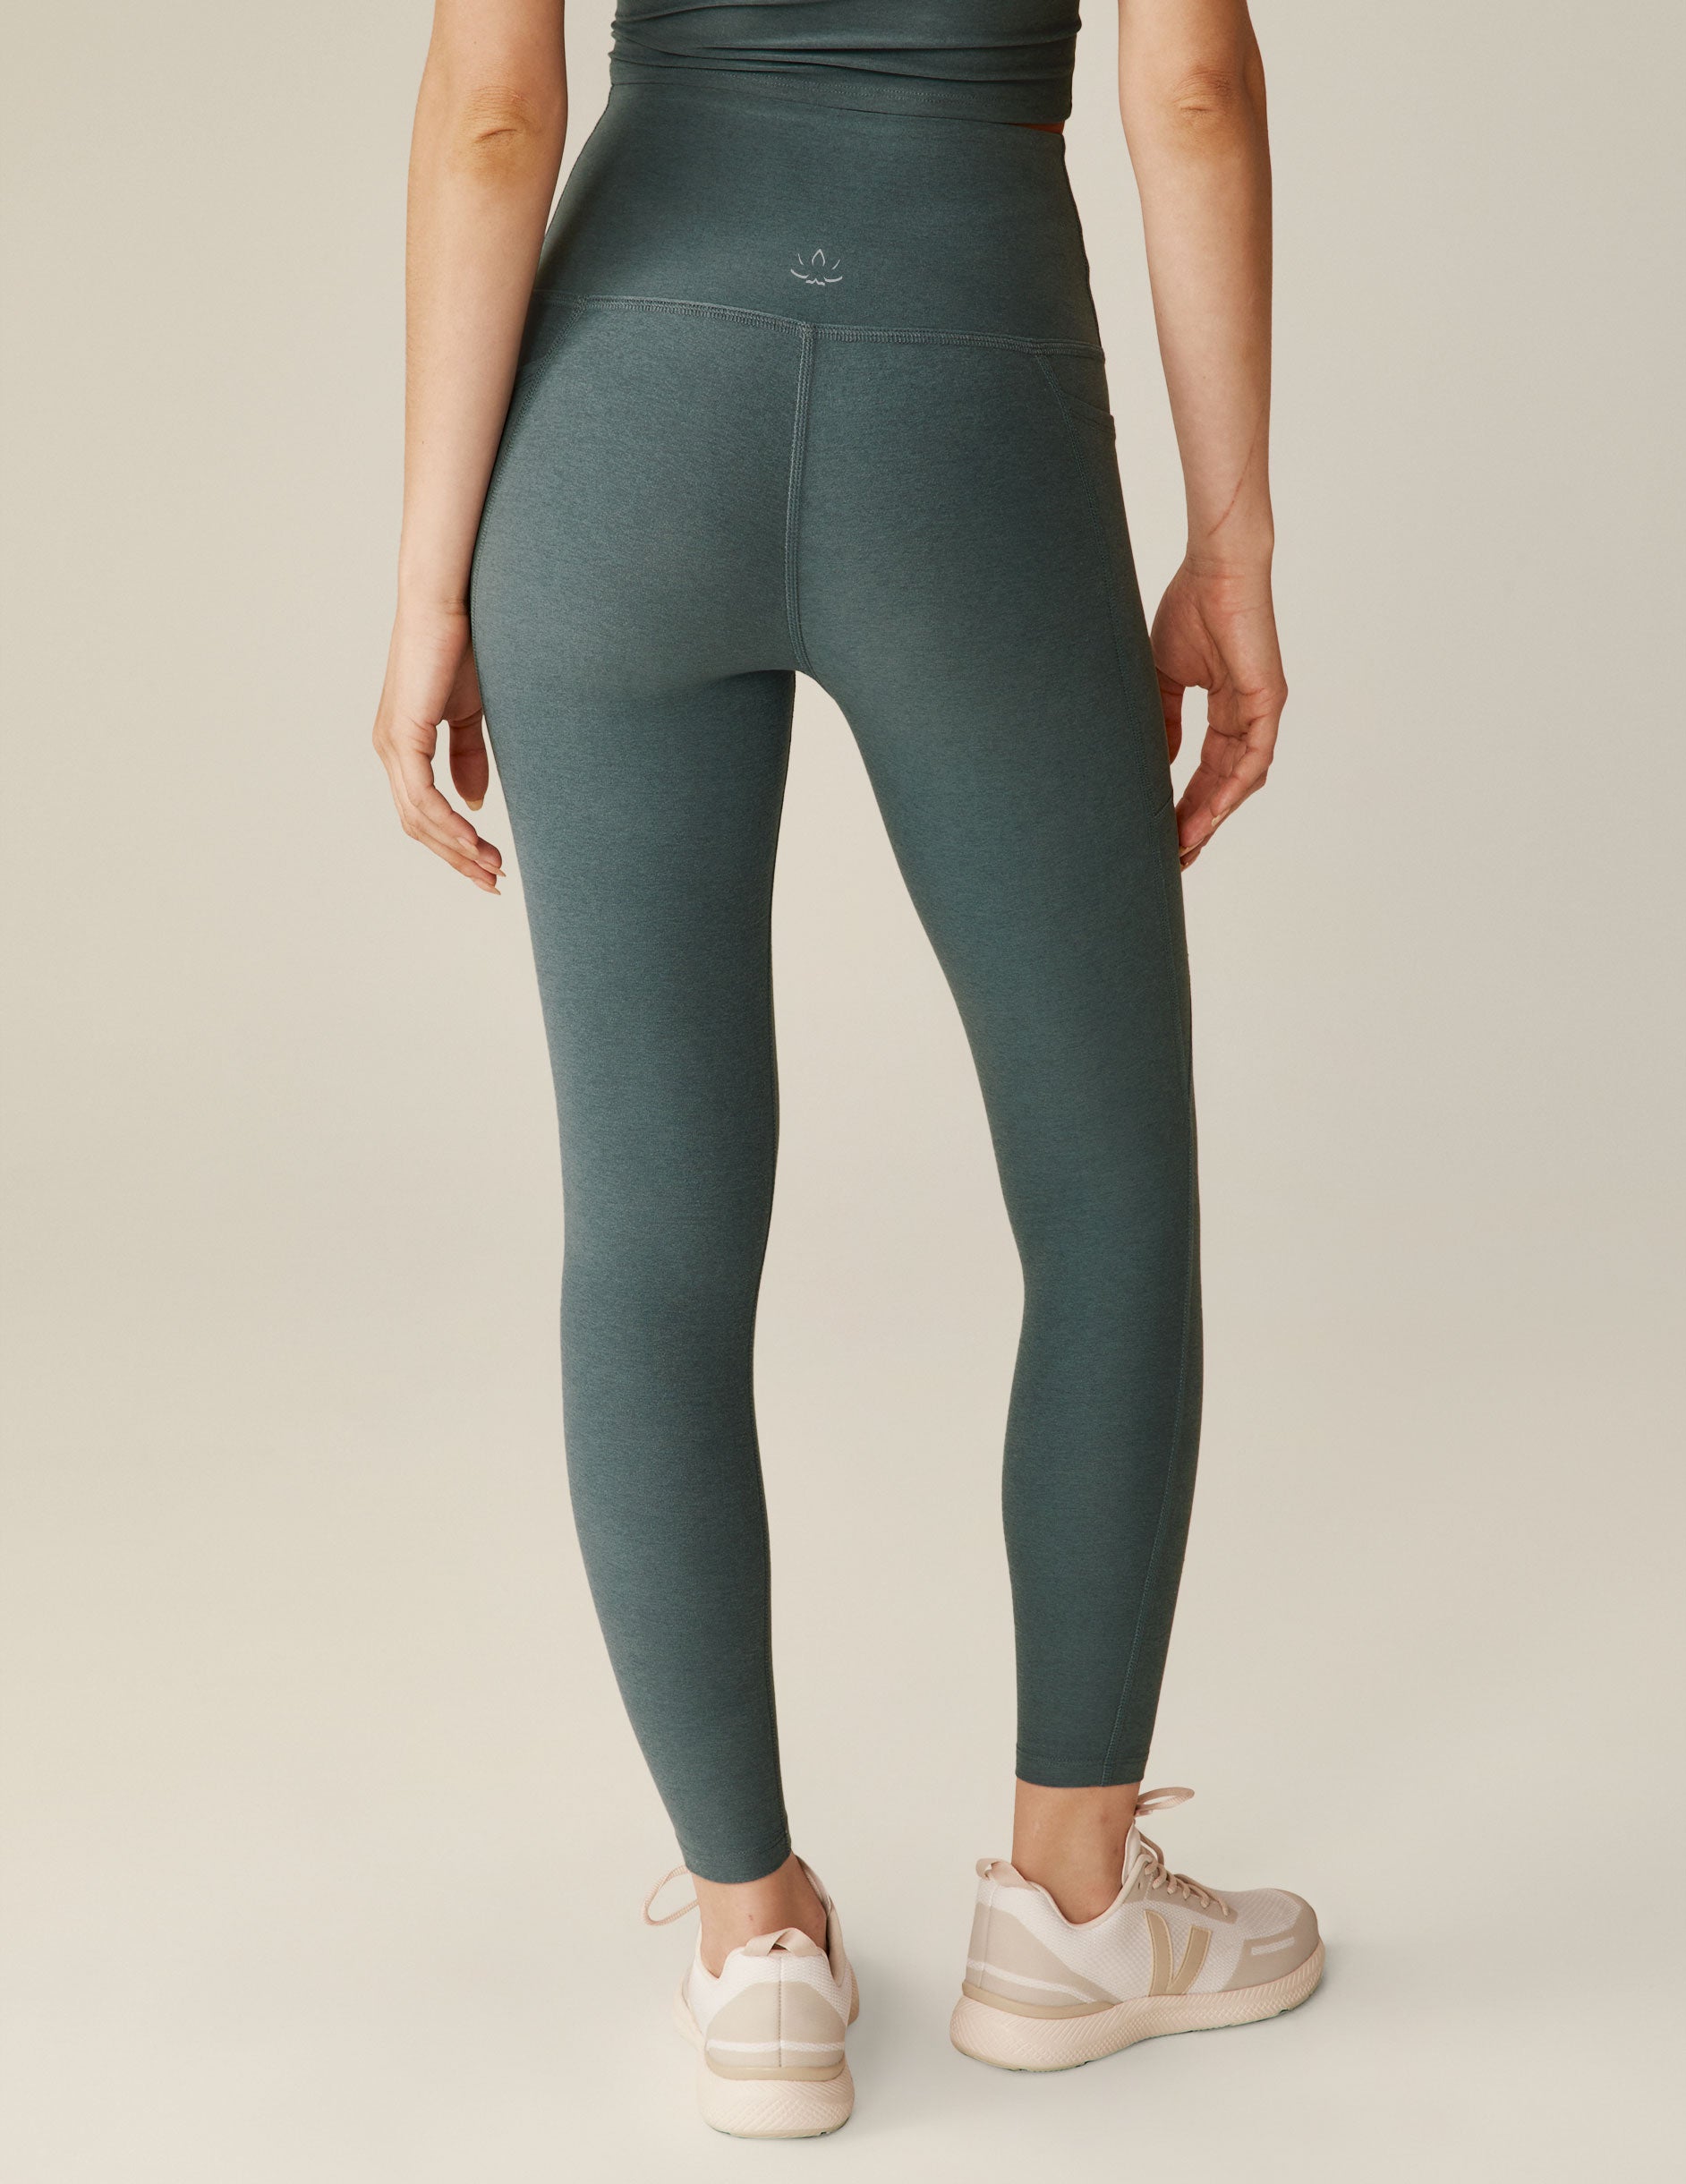 blue high-waisted midi leggings with pockets. 